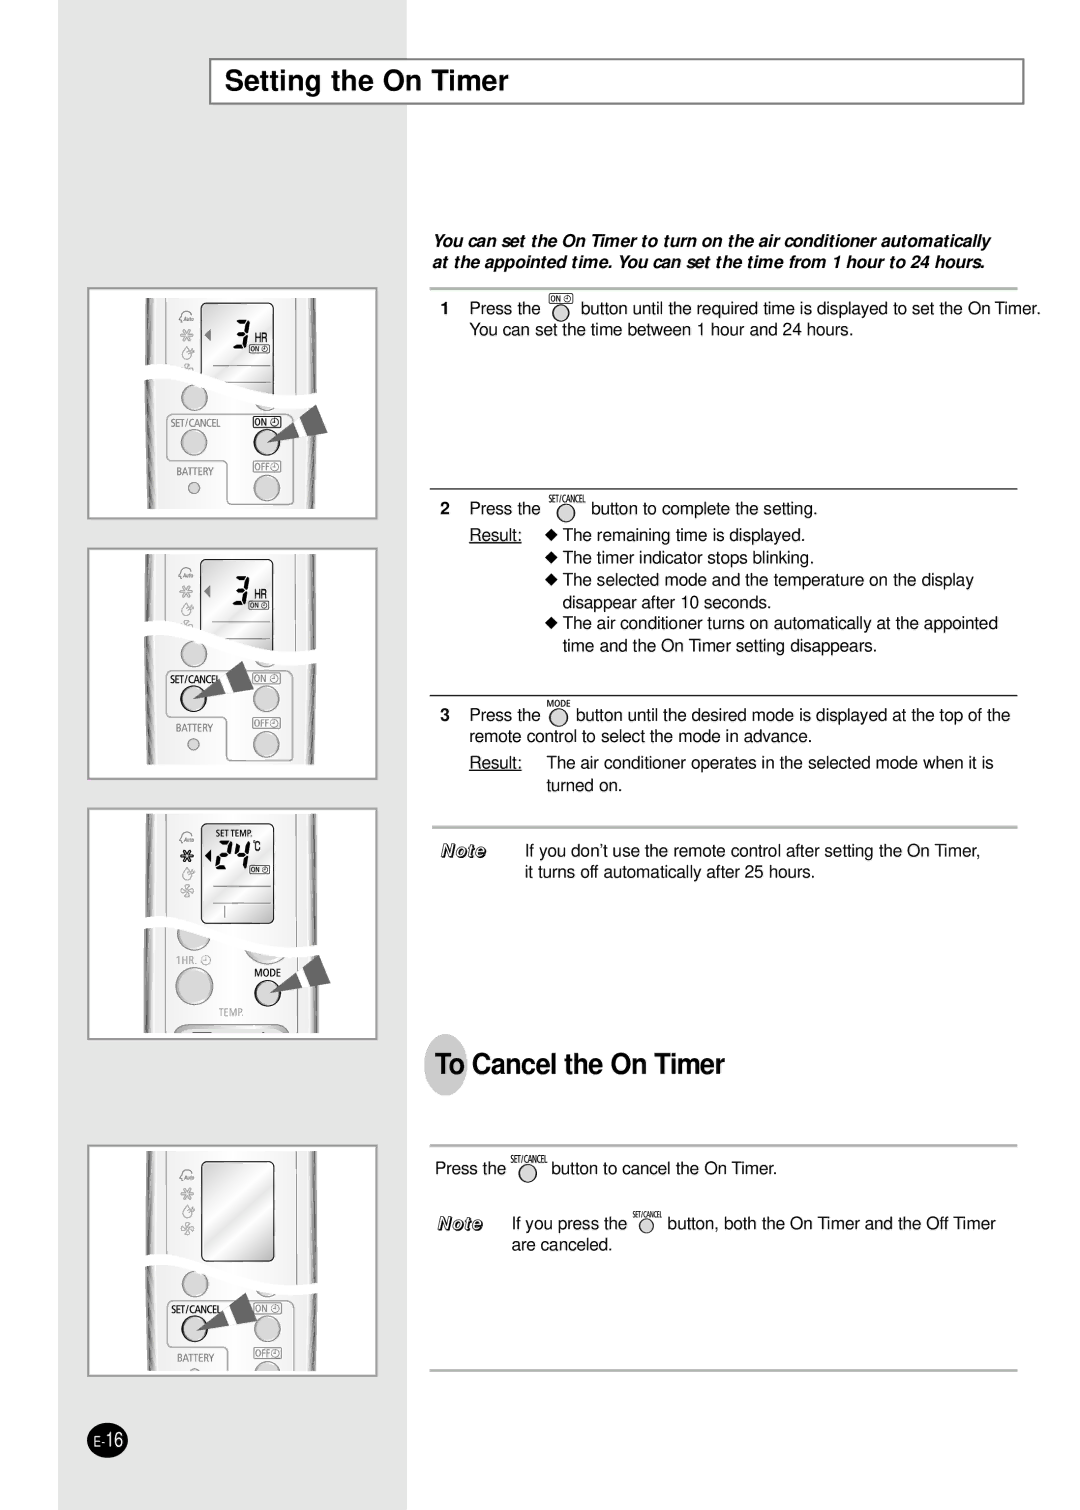 Samsung AST18WJWE/MID, AST18WJWE/XSG, AST24W6WE/XSG, AST18WJWE/HAC manual Setting the On Timer, To Cancel the On Timer 